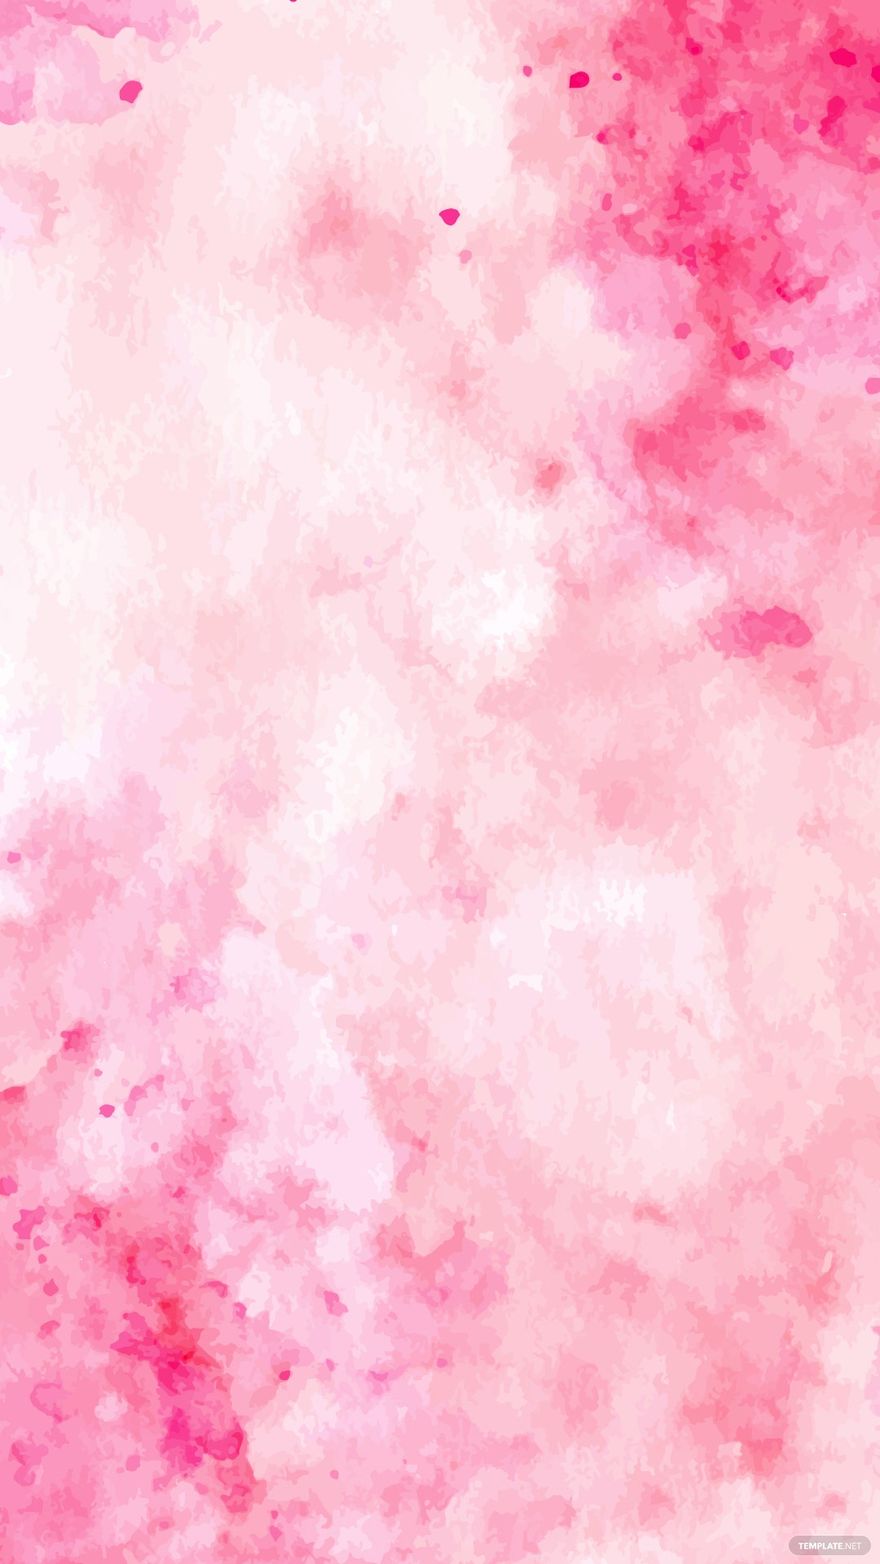 Free Pink and White iPhone Background in Illustrator, EPS, SVG, JPG